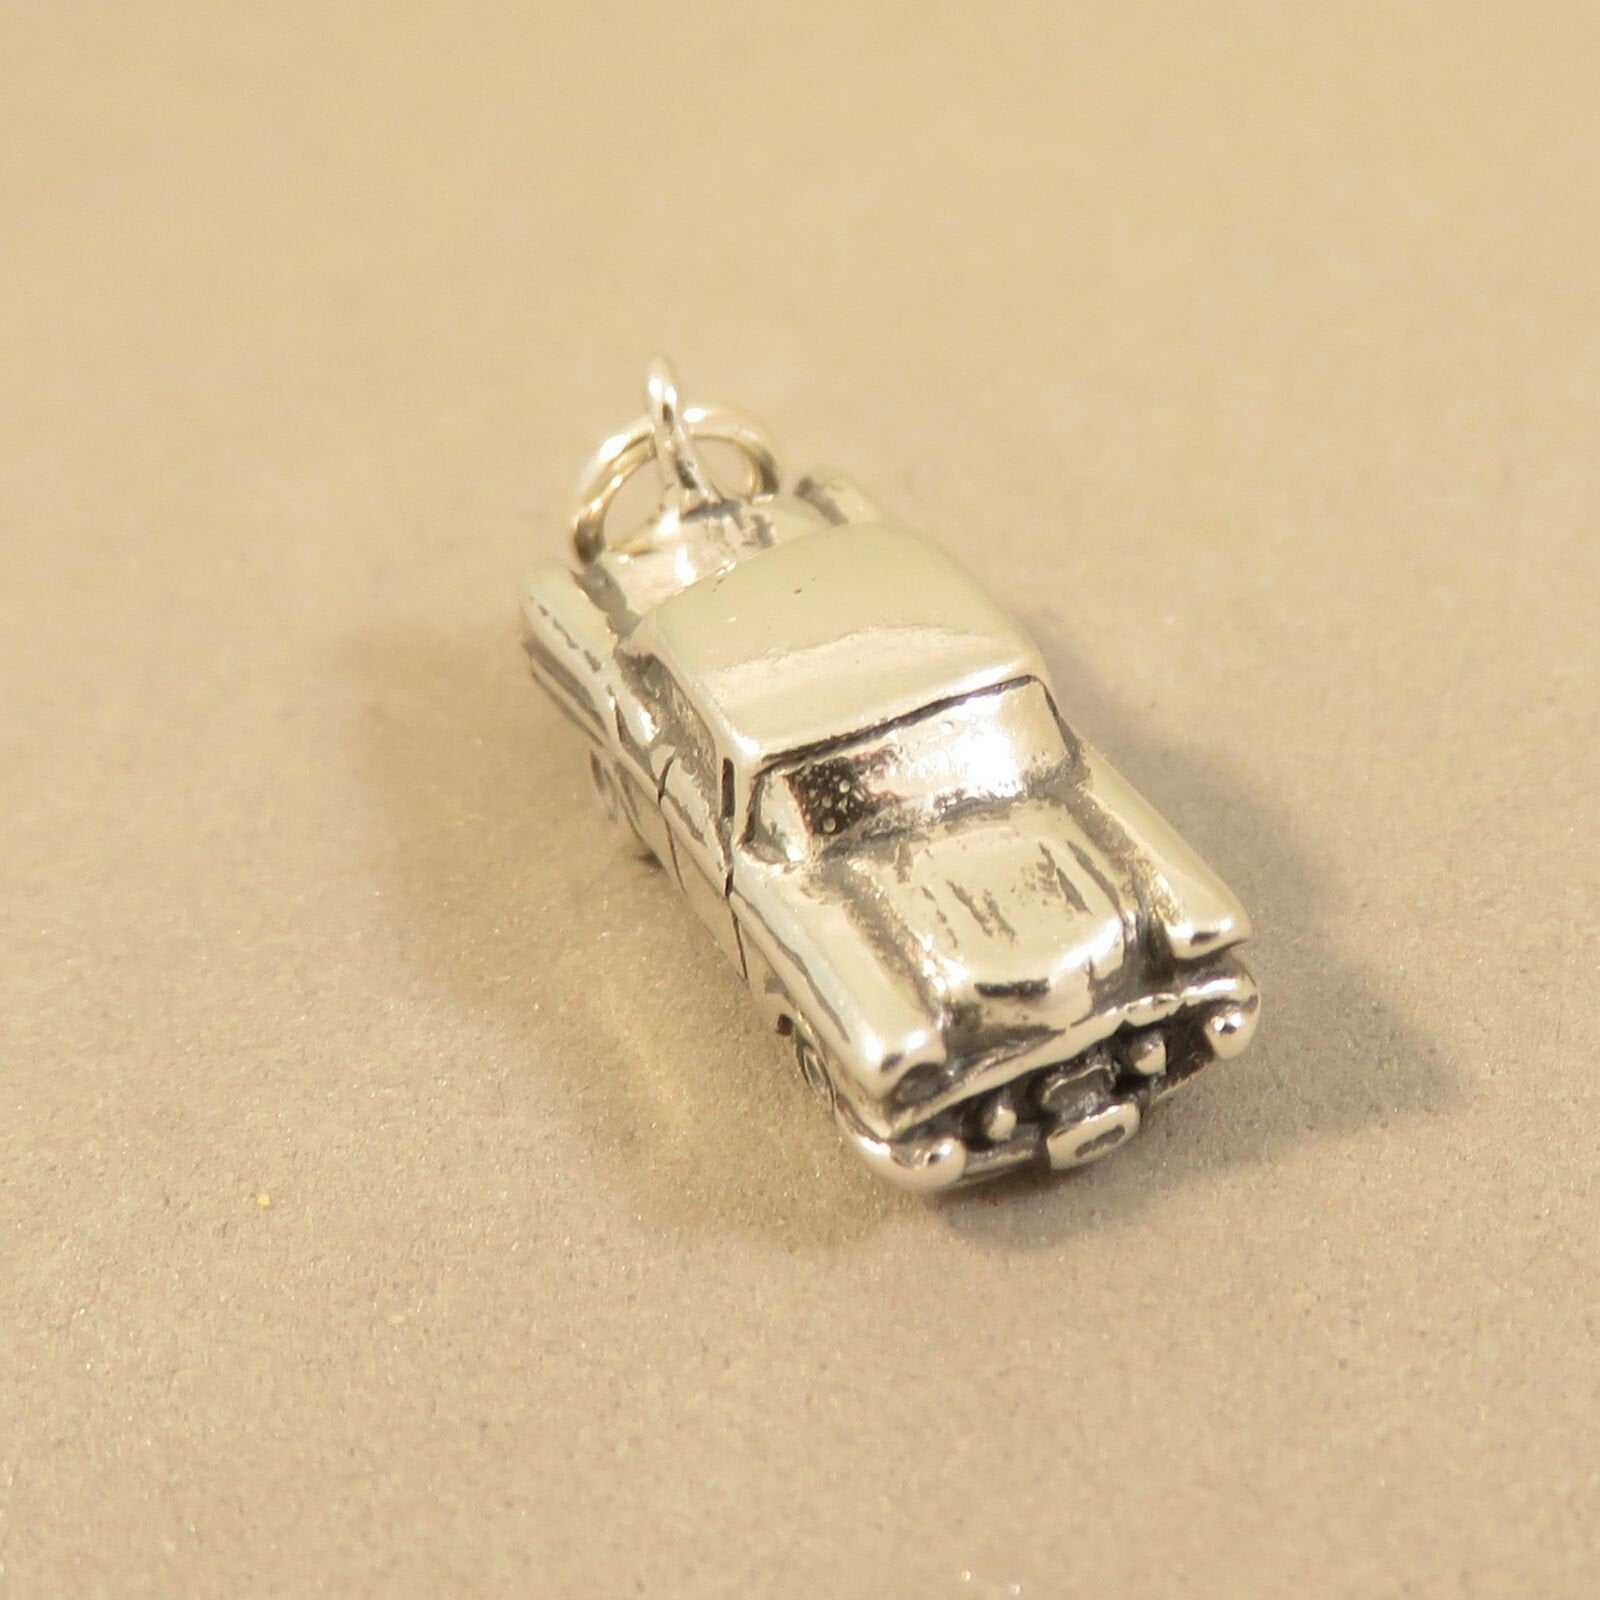 The Toy Car Pendant